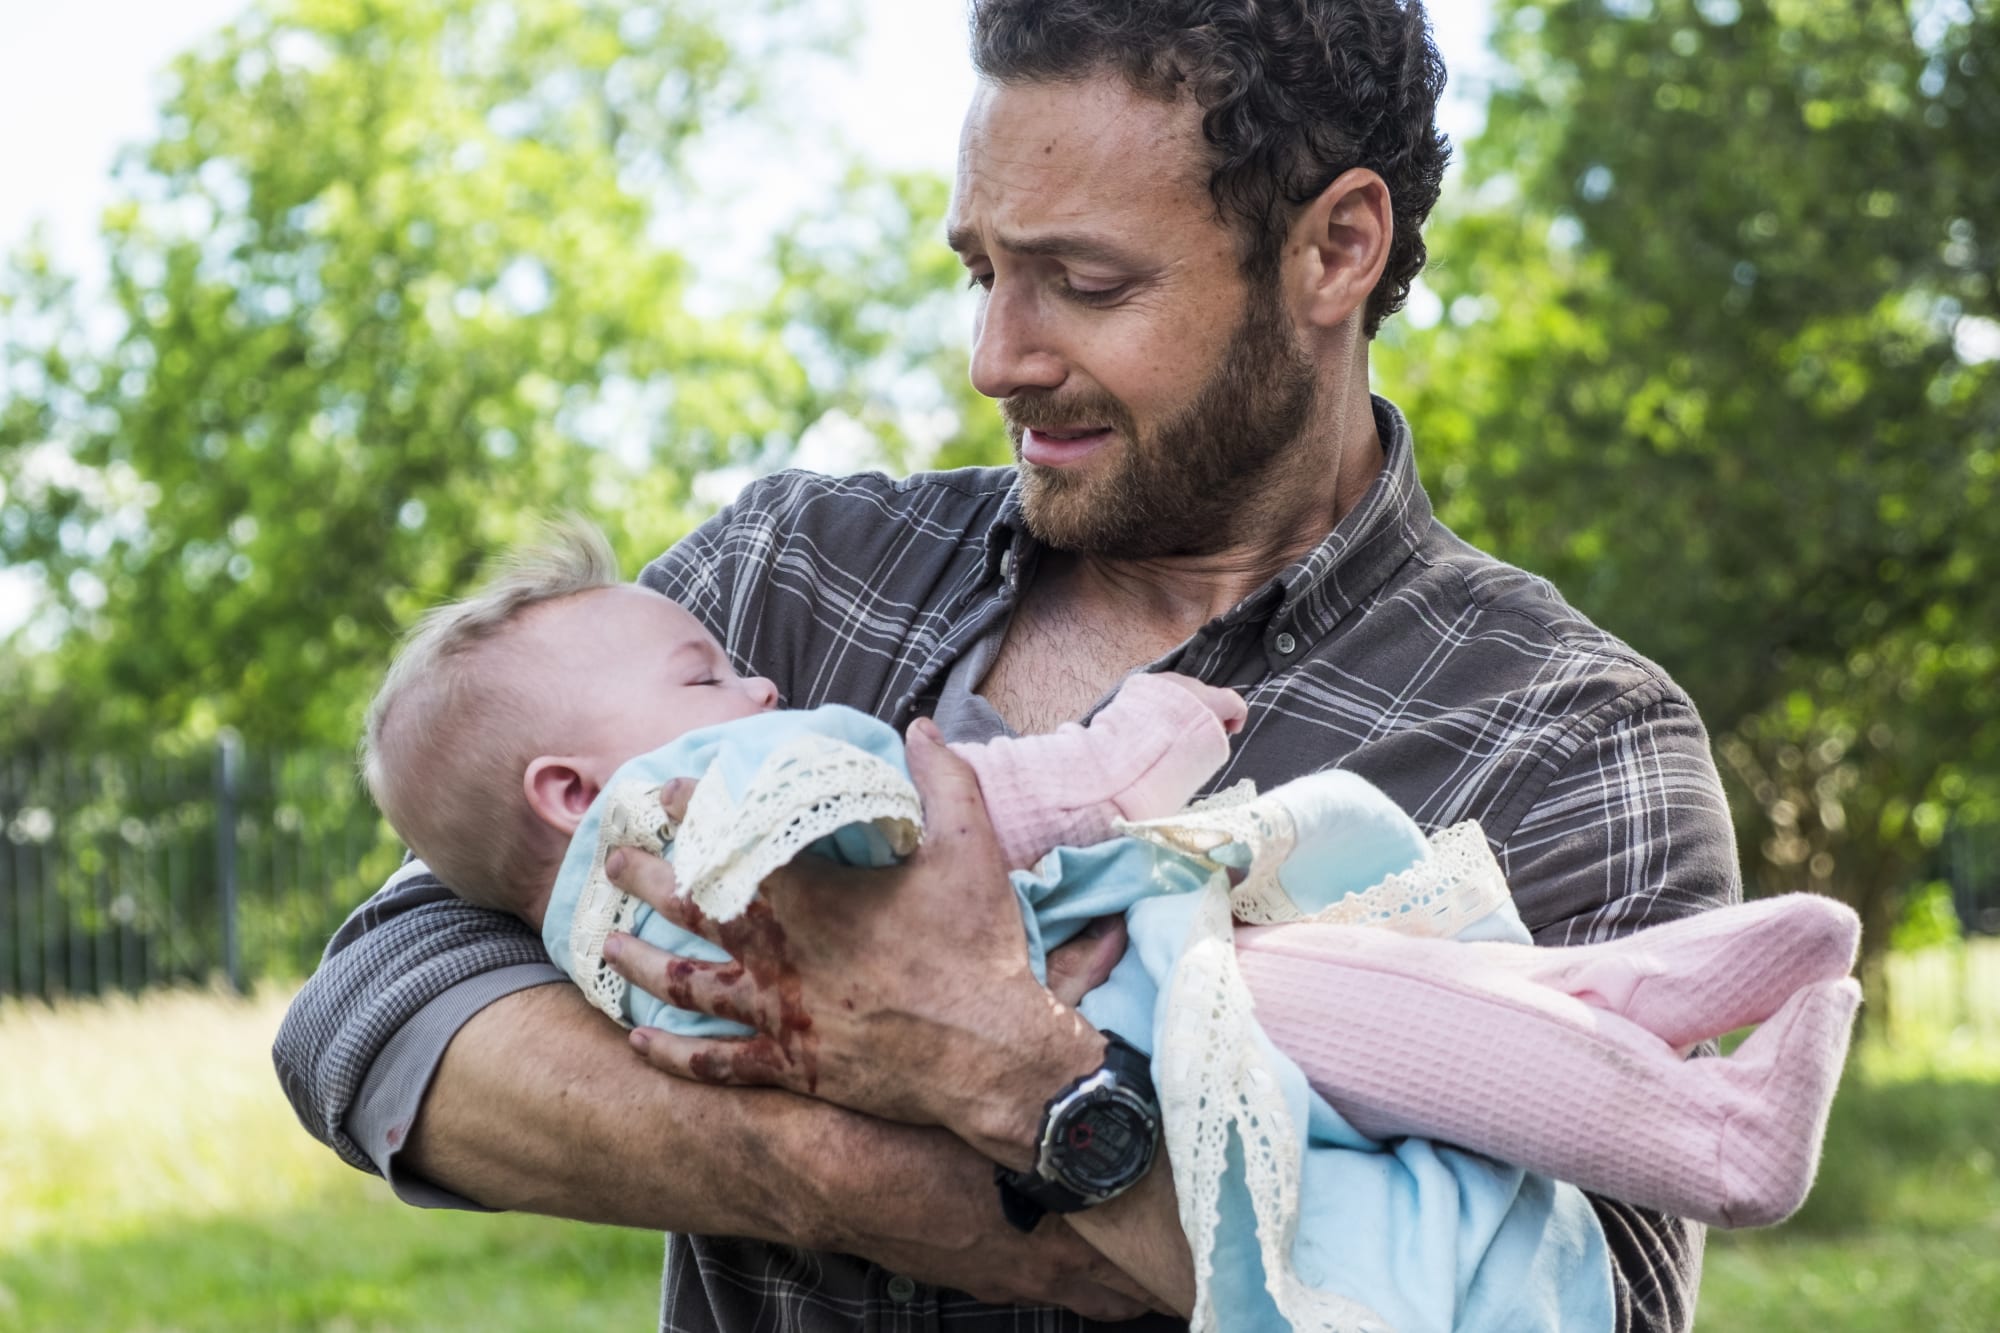 The Walking Dead: Baby Gracie as salvation